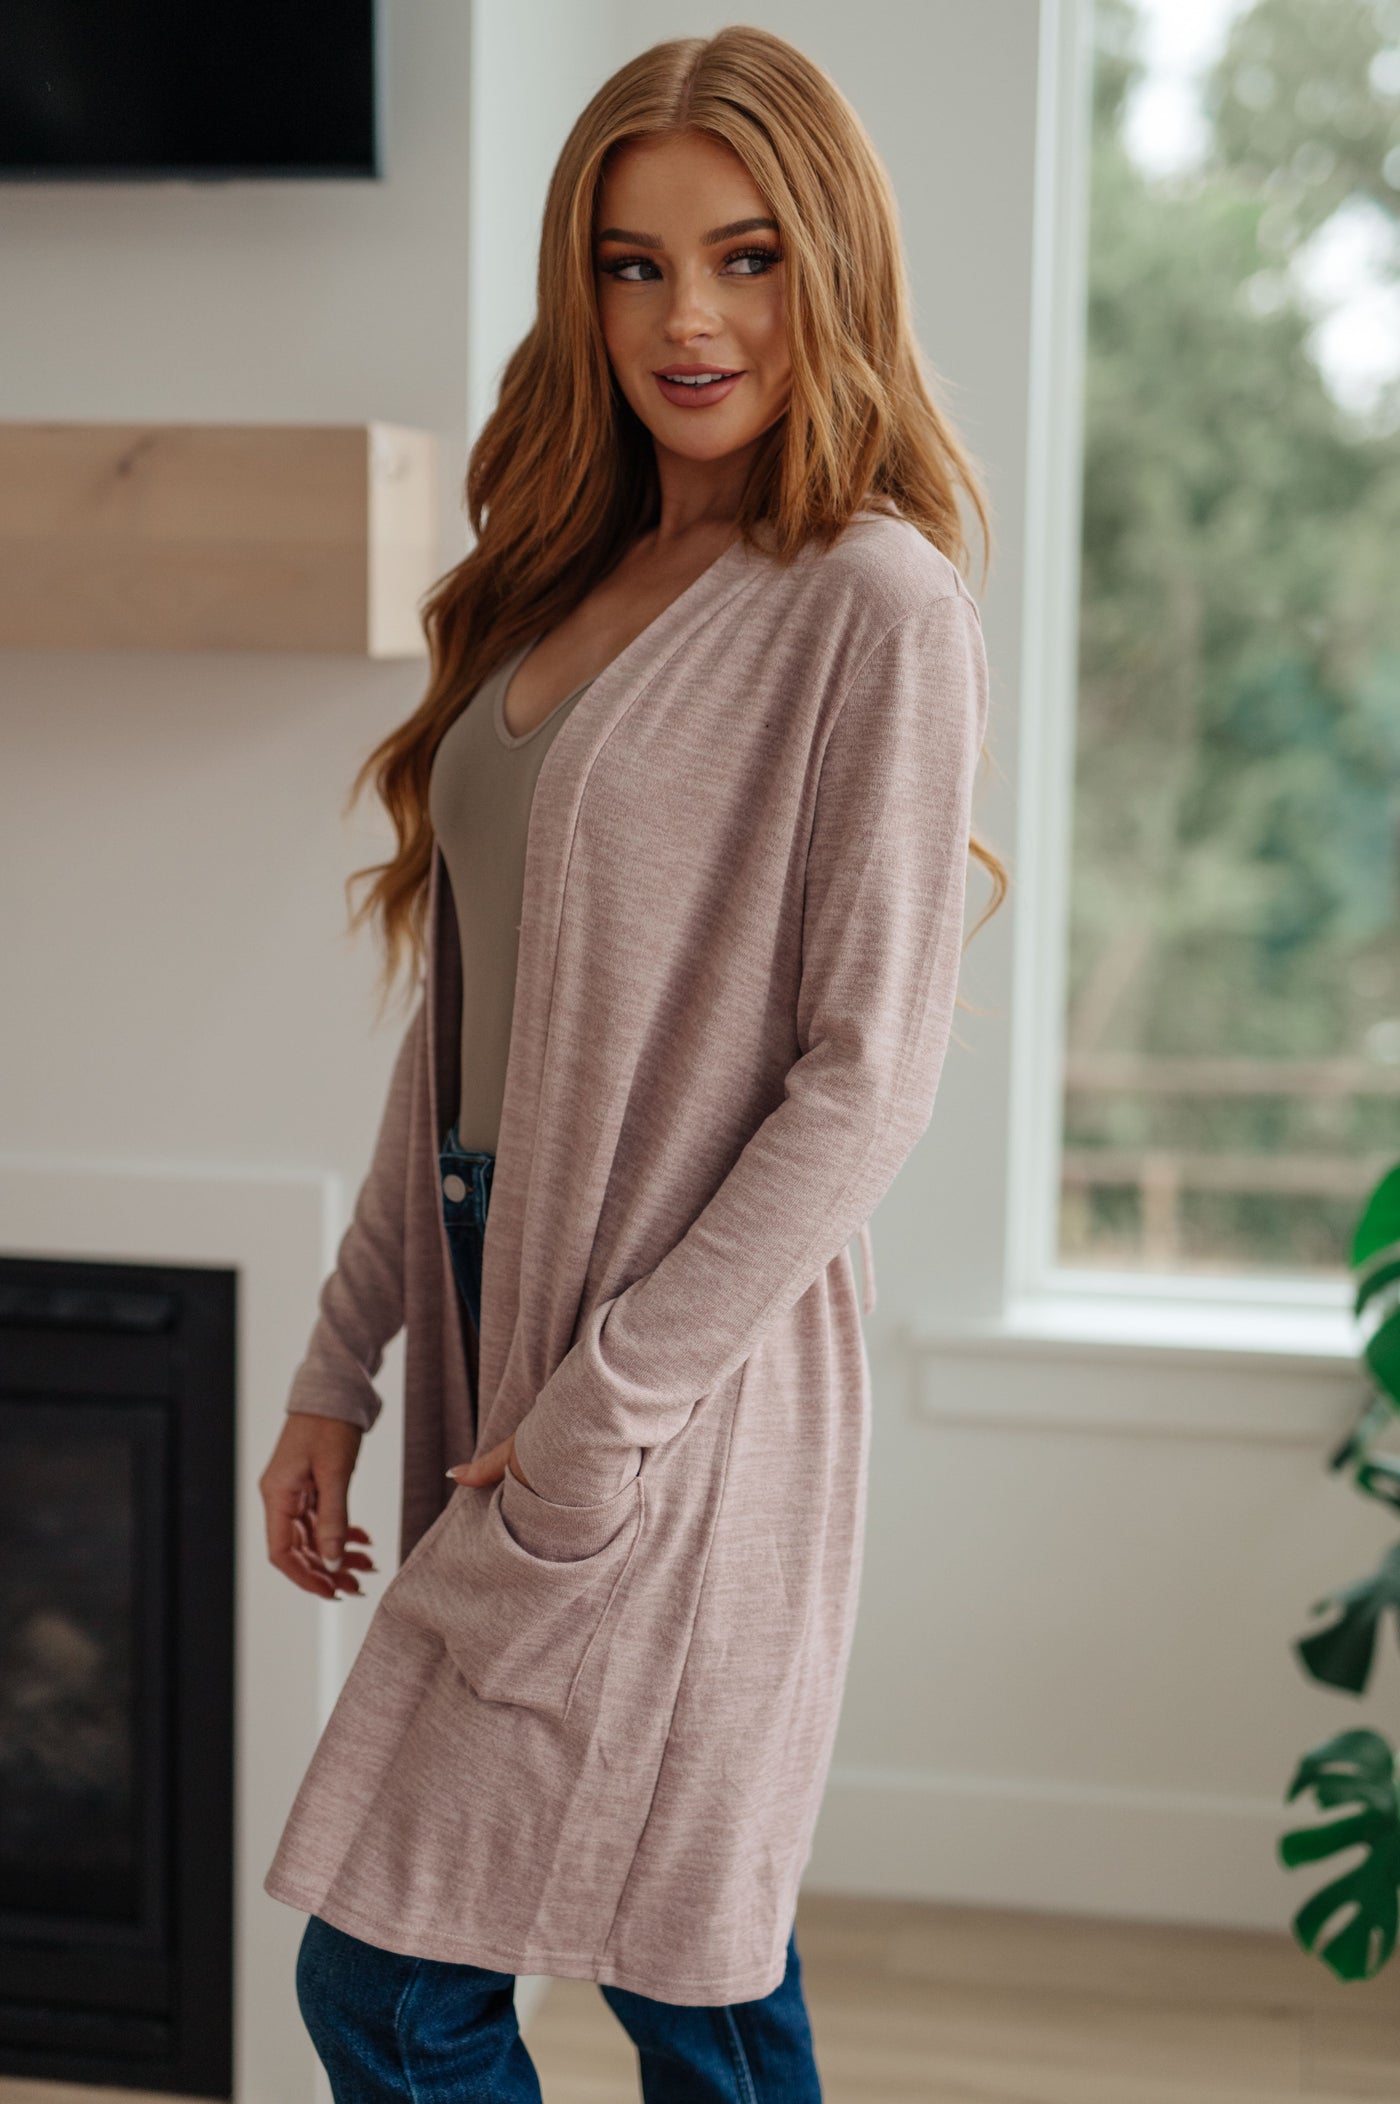 Features a sweater knit construction and an open front, with a drawstring in the back to cinch the waist for a more flattering shape. Perfect for cool days and evenings.